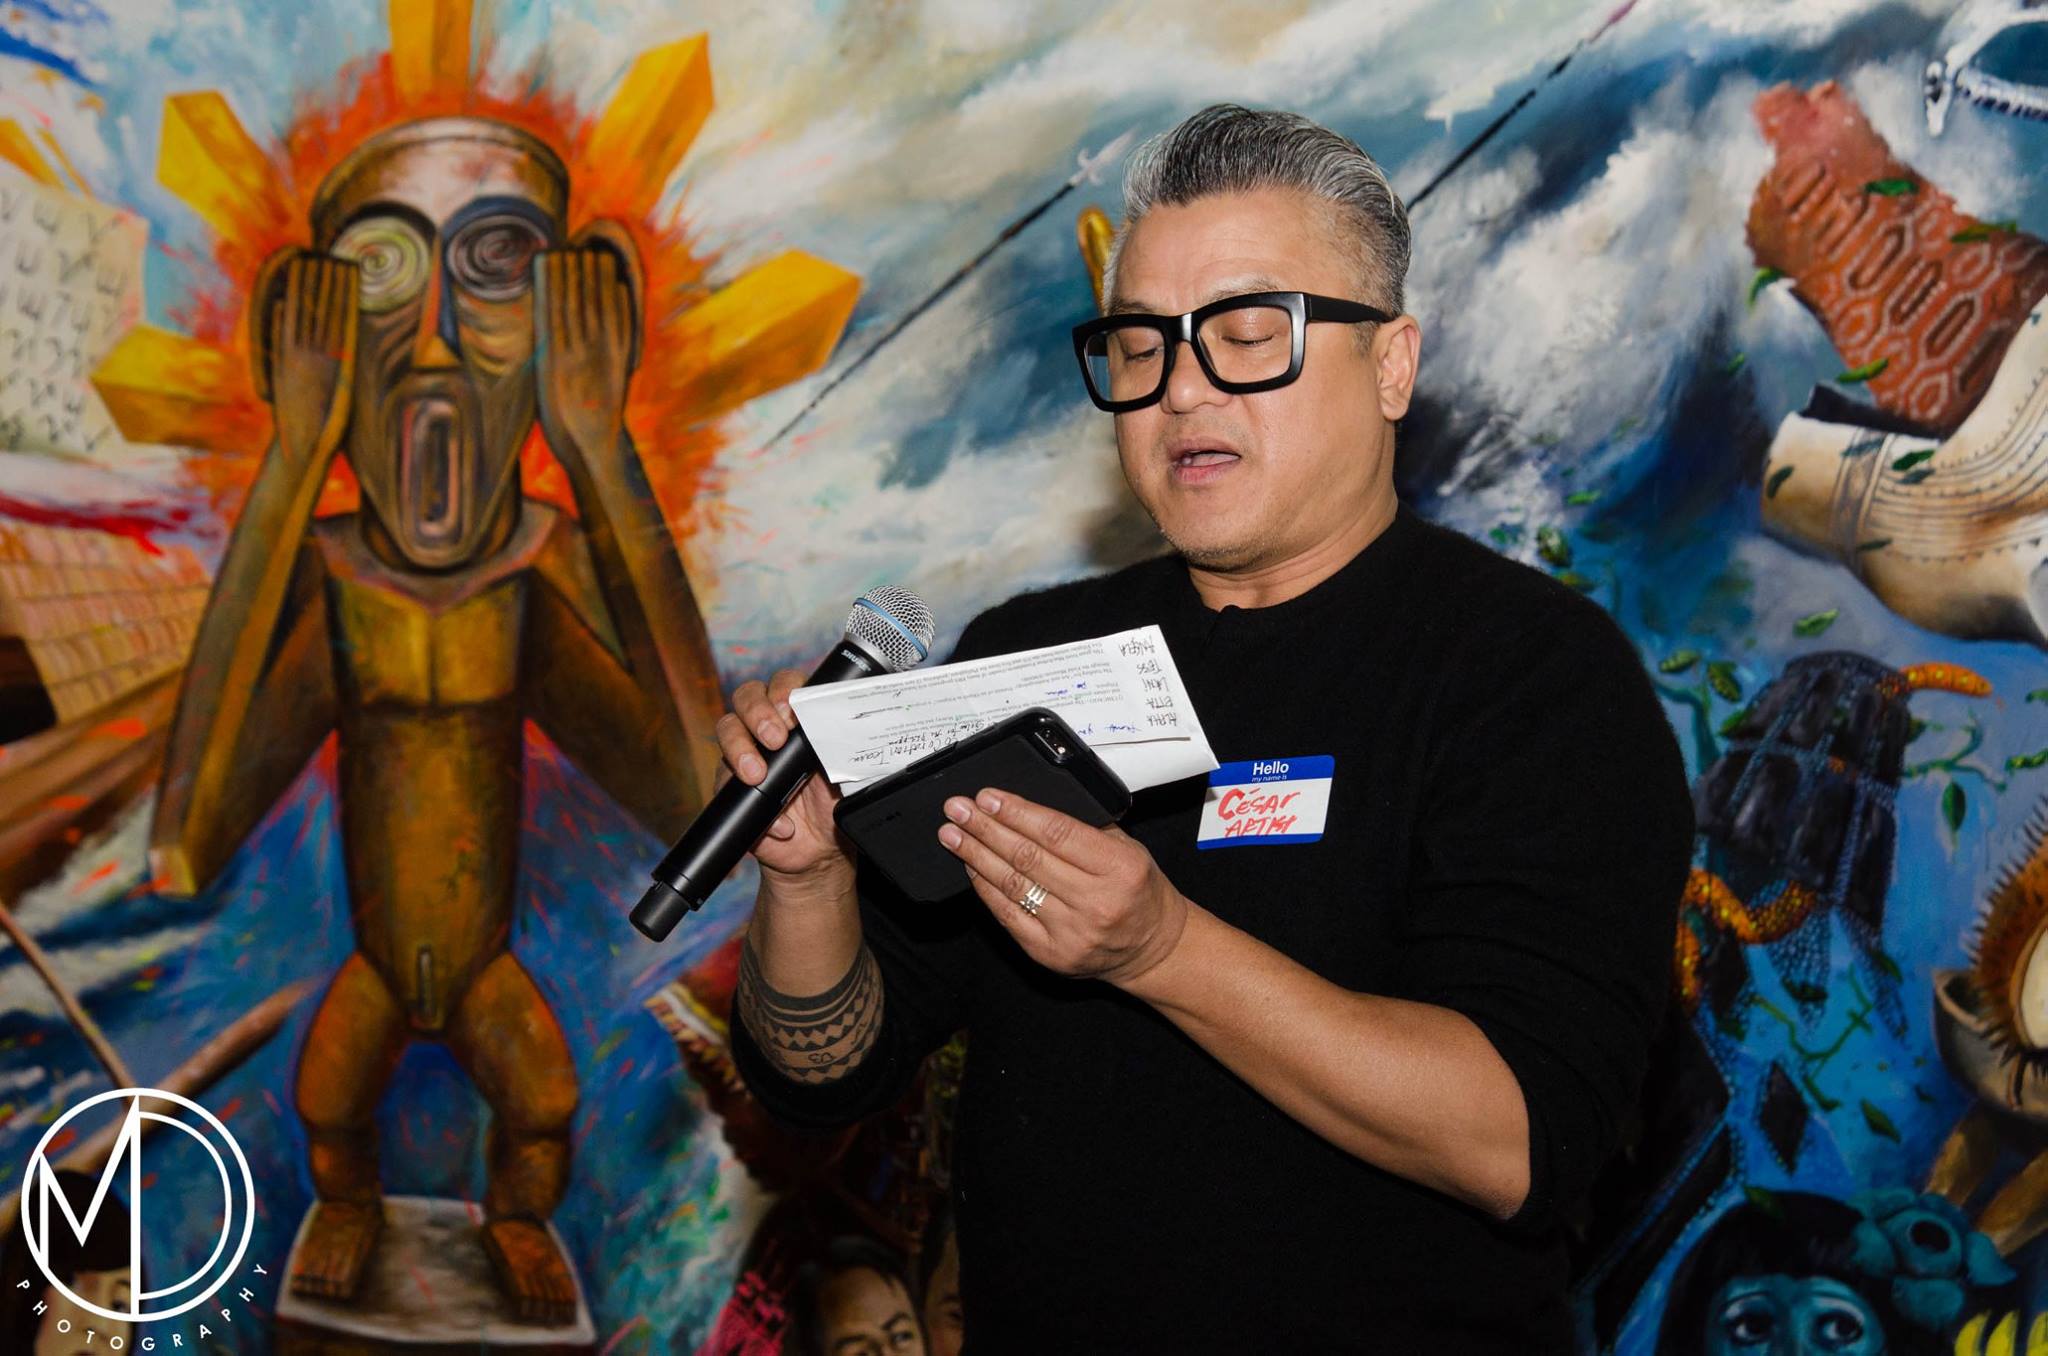 Local artist Cesar Conde presents to the audience about his contributions to the Art and Anthropology exhibit. (c) Field Museum of Natural History - CC BY-NC 4.0